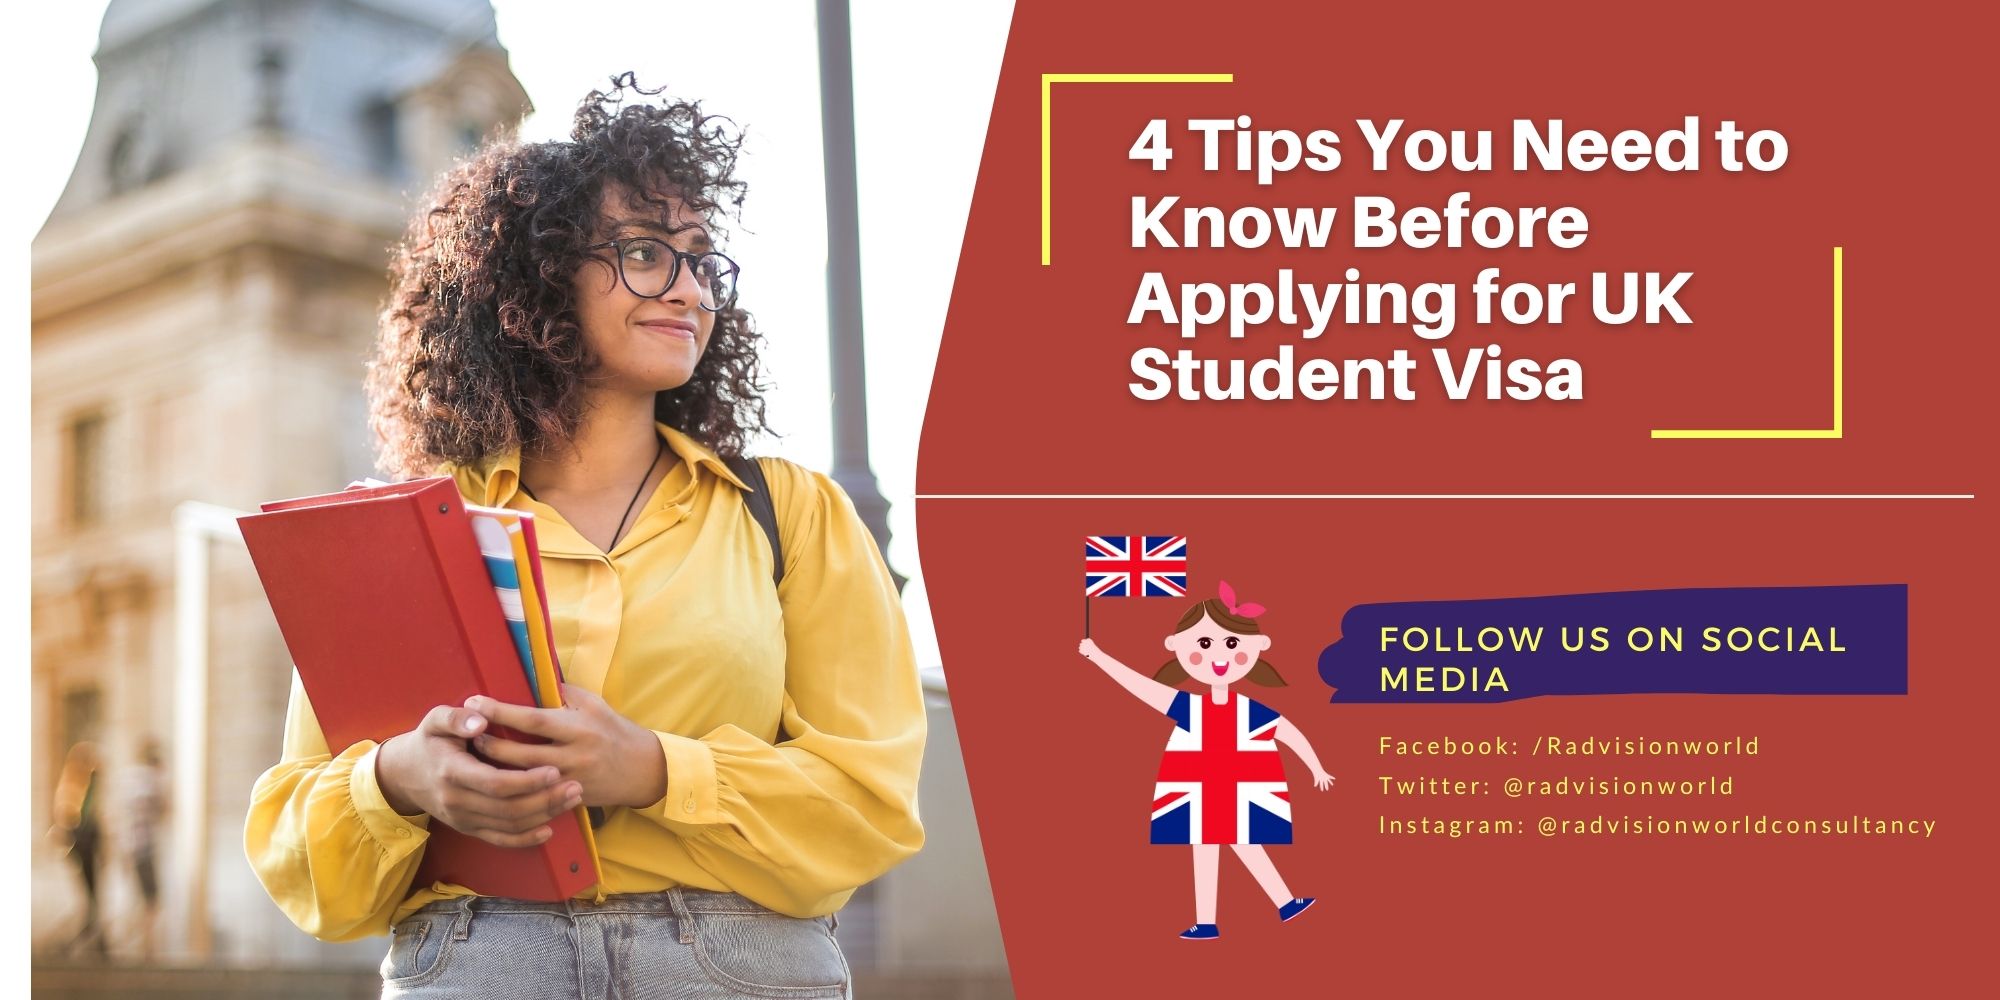 Top 4 Tips You Need to Know Before Applying for UK Student Visa